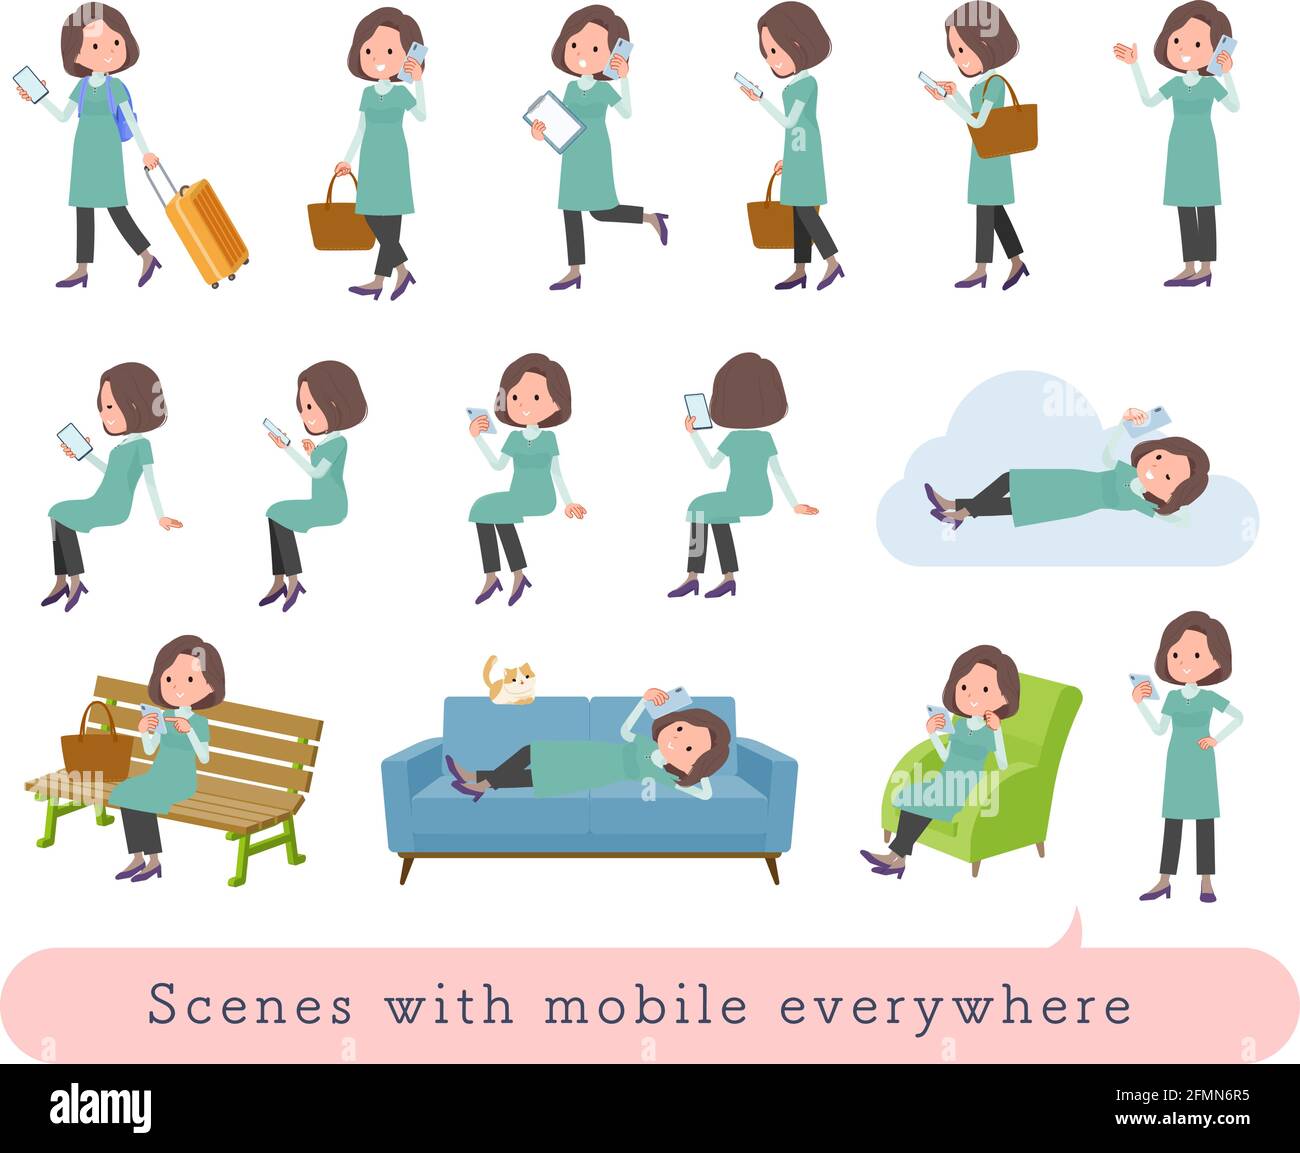 A set of middle-aged women in tunic who uses a smartphone in various scenes.It's vector art so easy to edit. Stock Vector